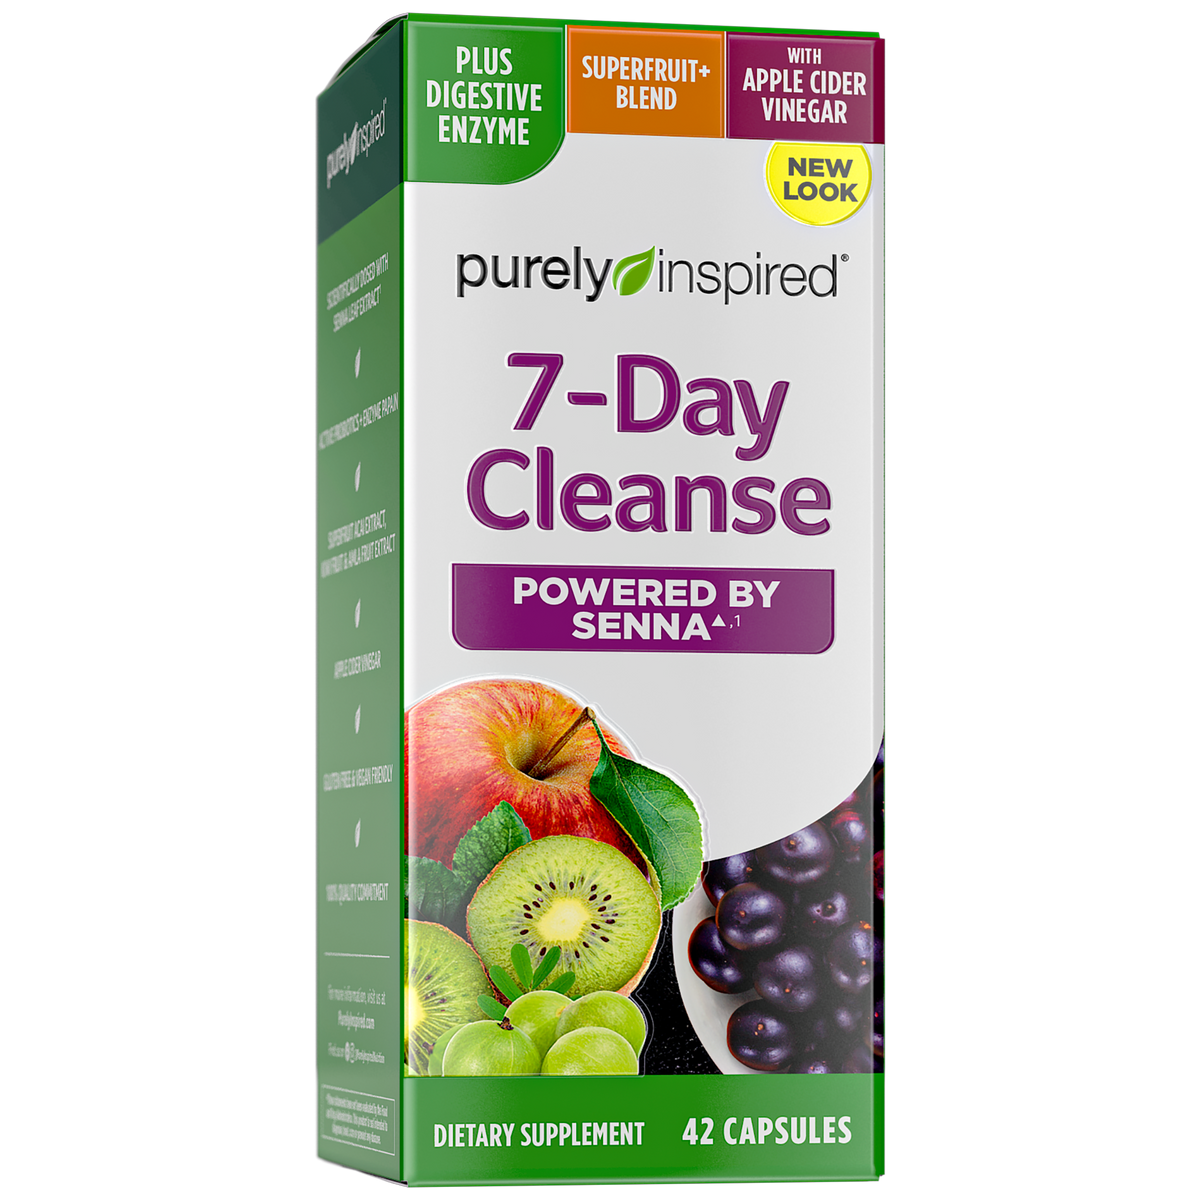 7-Day Cleanse